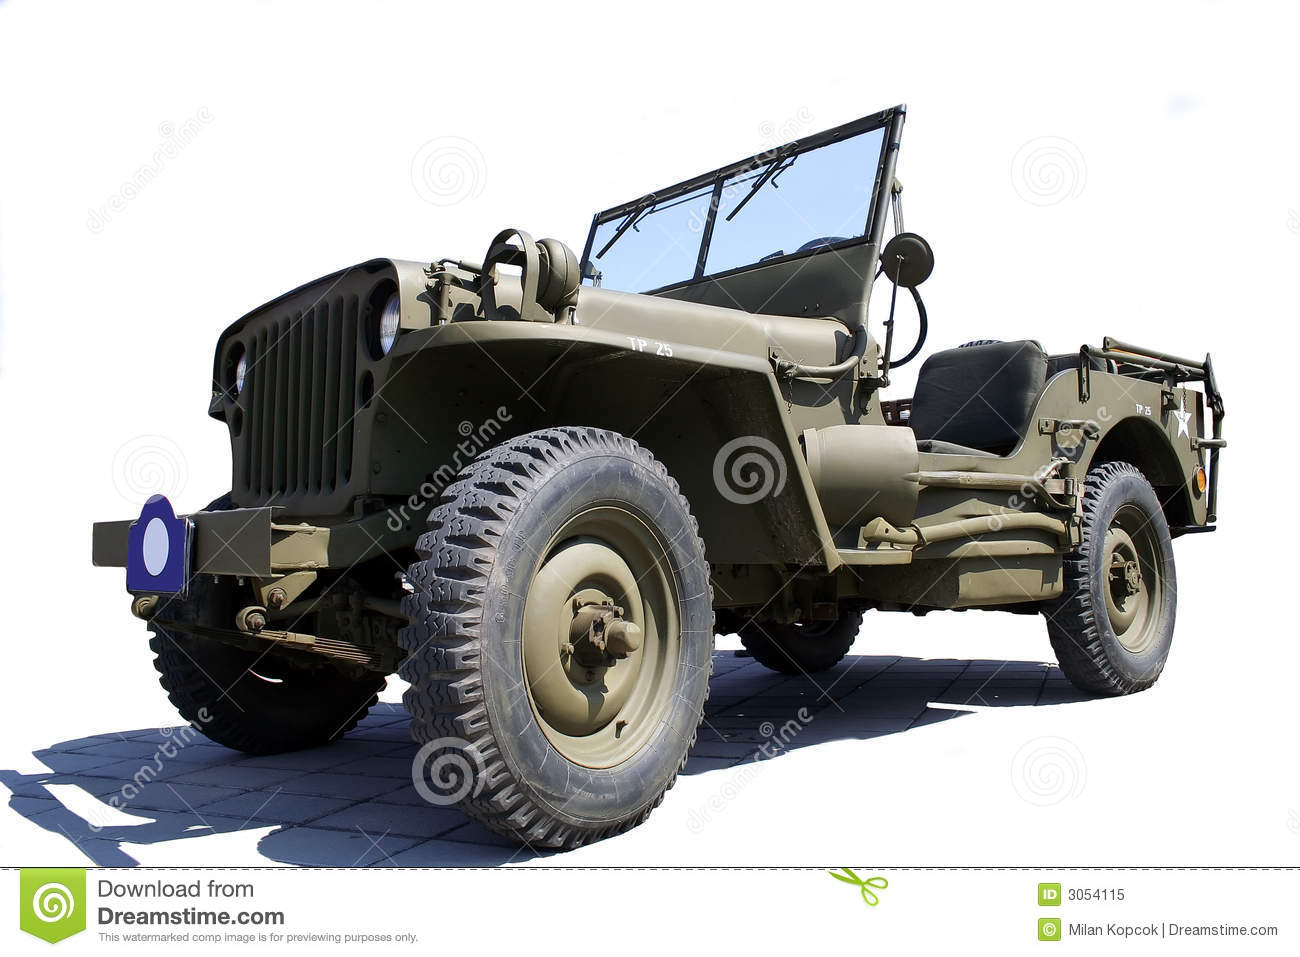 Us Army Jeep Royalty Free Stock Photo   Image  3054115